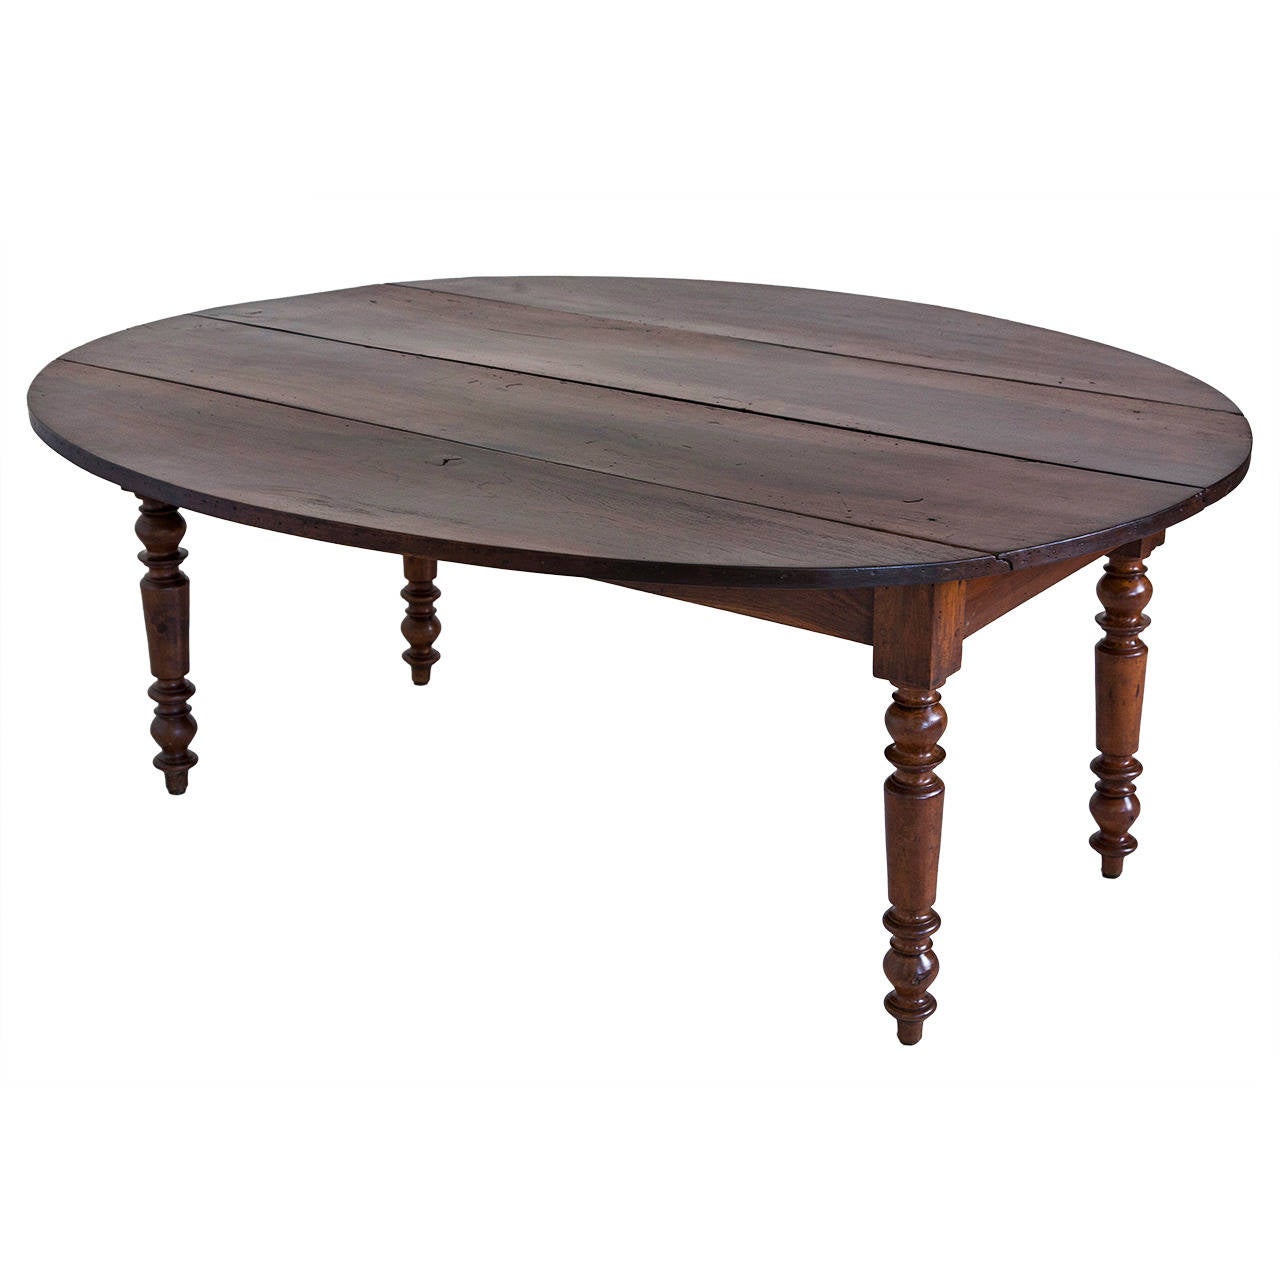 Antique French Oval Farm Table of Solid Walnut